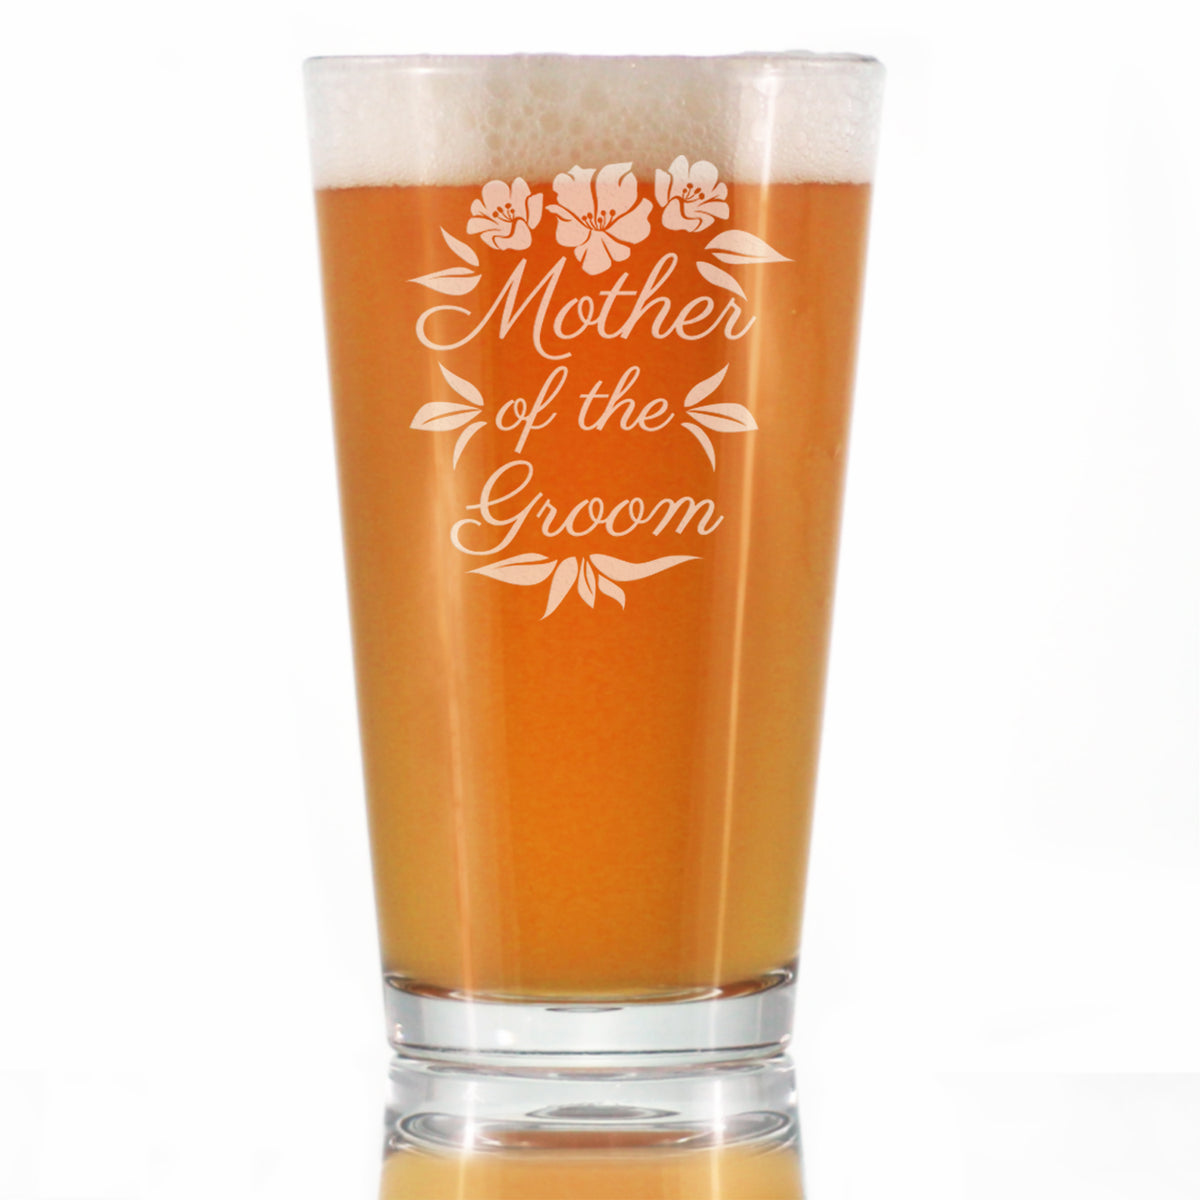 Mother of the Groom Pint Glass - Unique Wedding Gift for Soon to Be Mother-in-Law - Cute Engraved Wedding Cup Gift